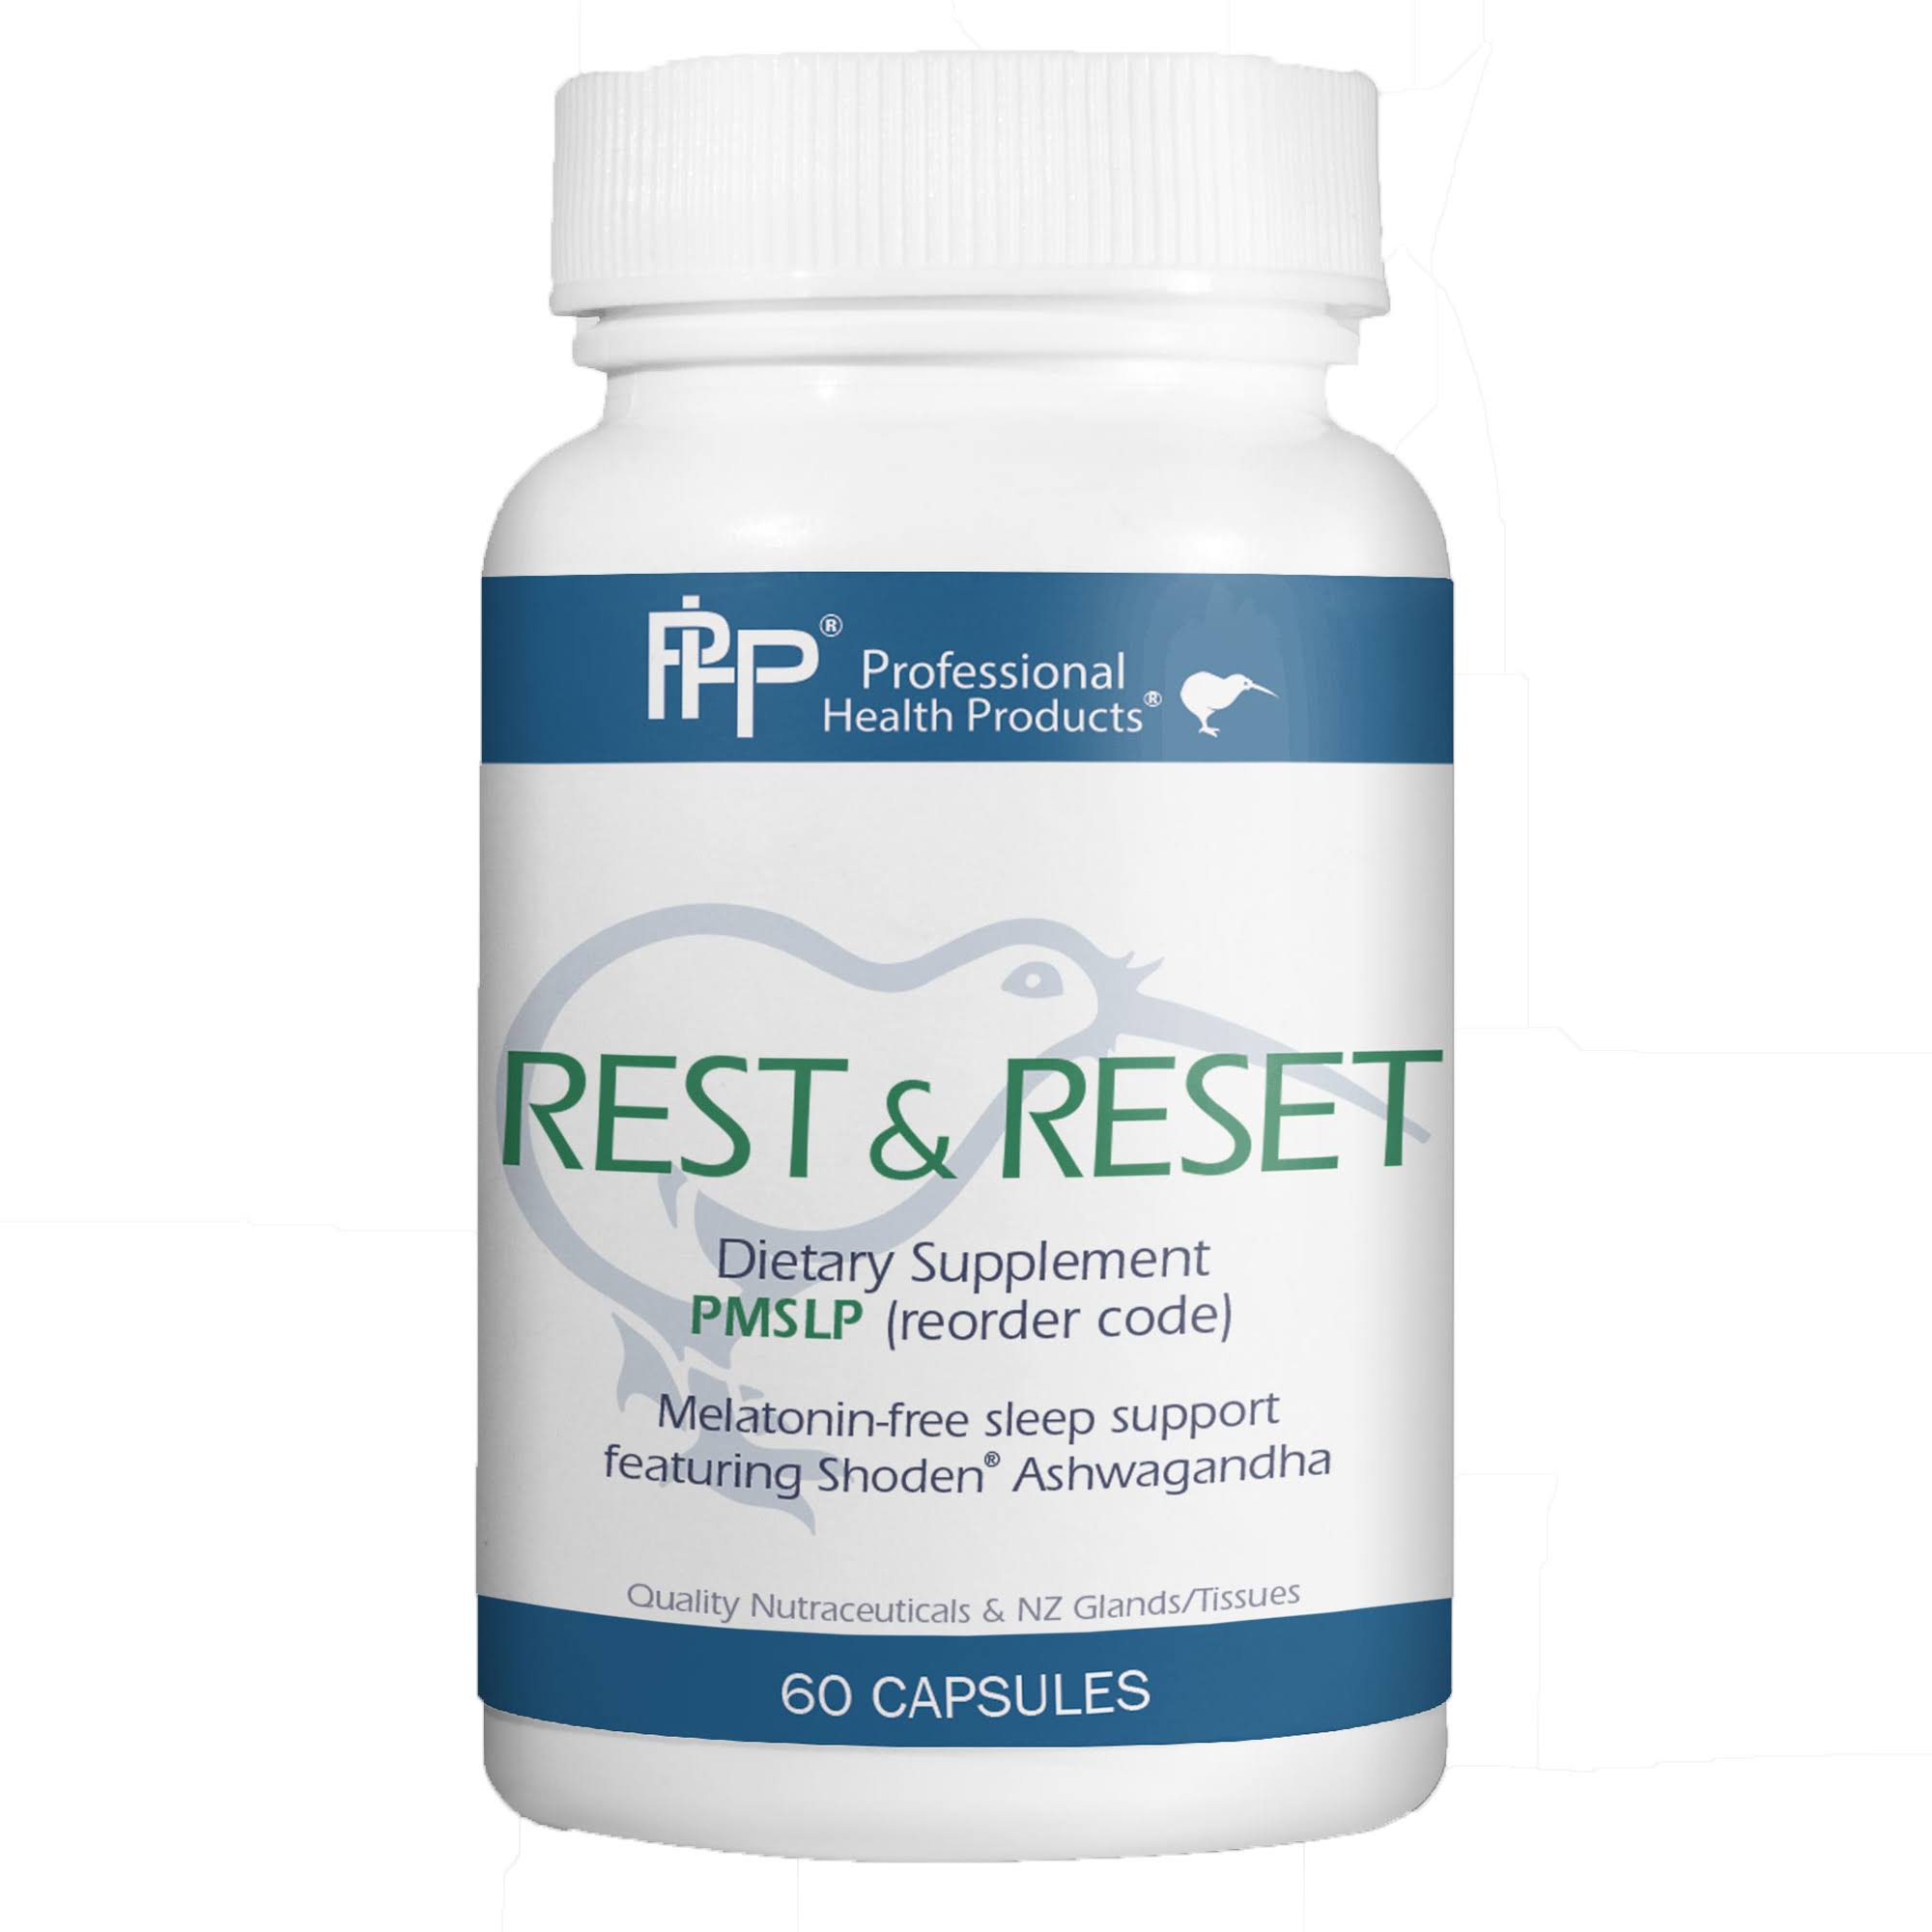 Professional Health Products - Rest & Reset - 60 Capsules